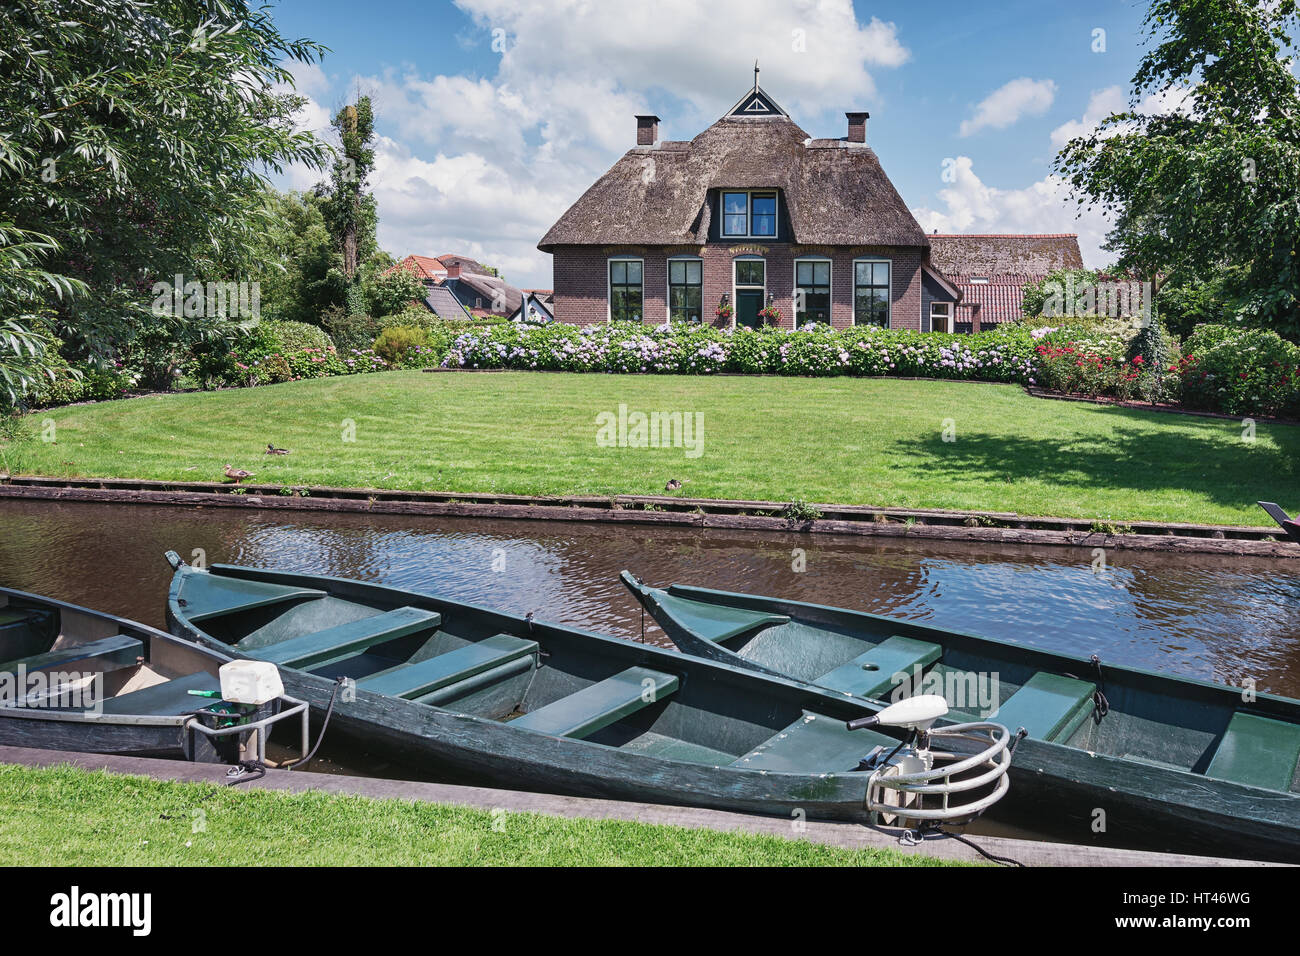 Giethoorn, Netherlands – June 29, 2016: Moored boats on the canal in the background house with a garden. Stock Photo